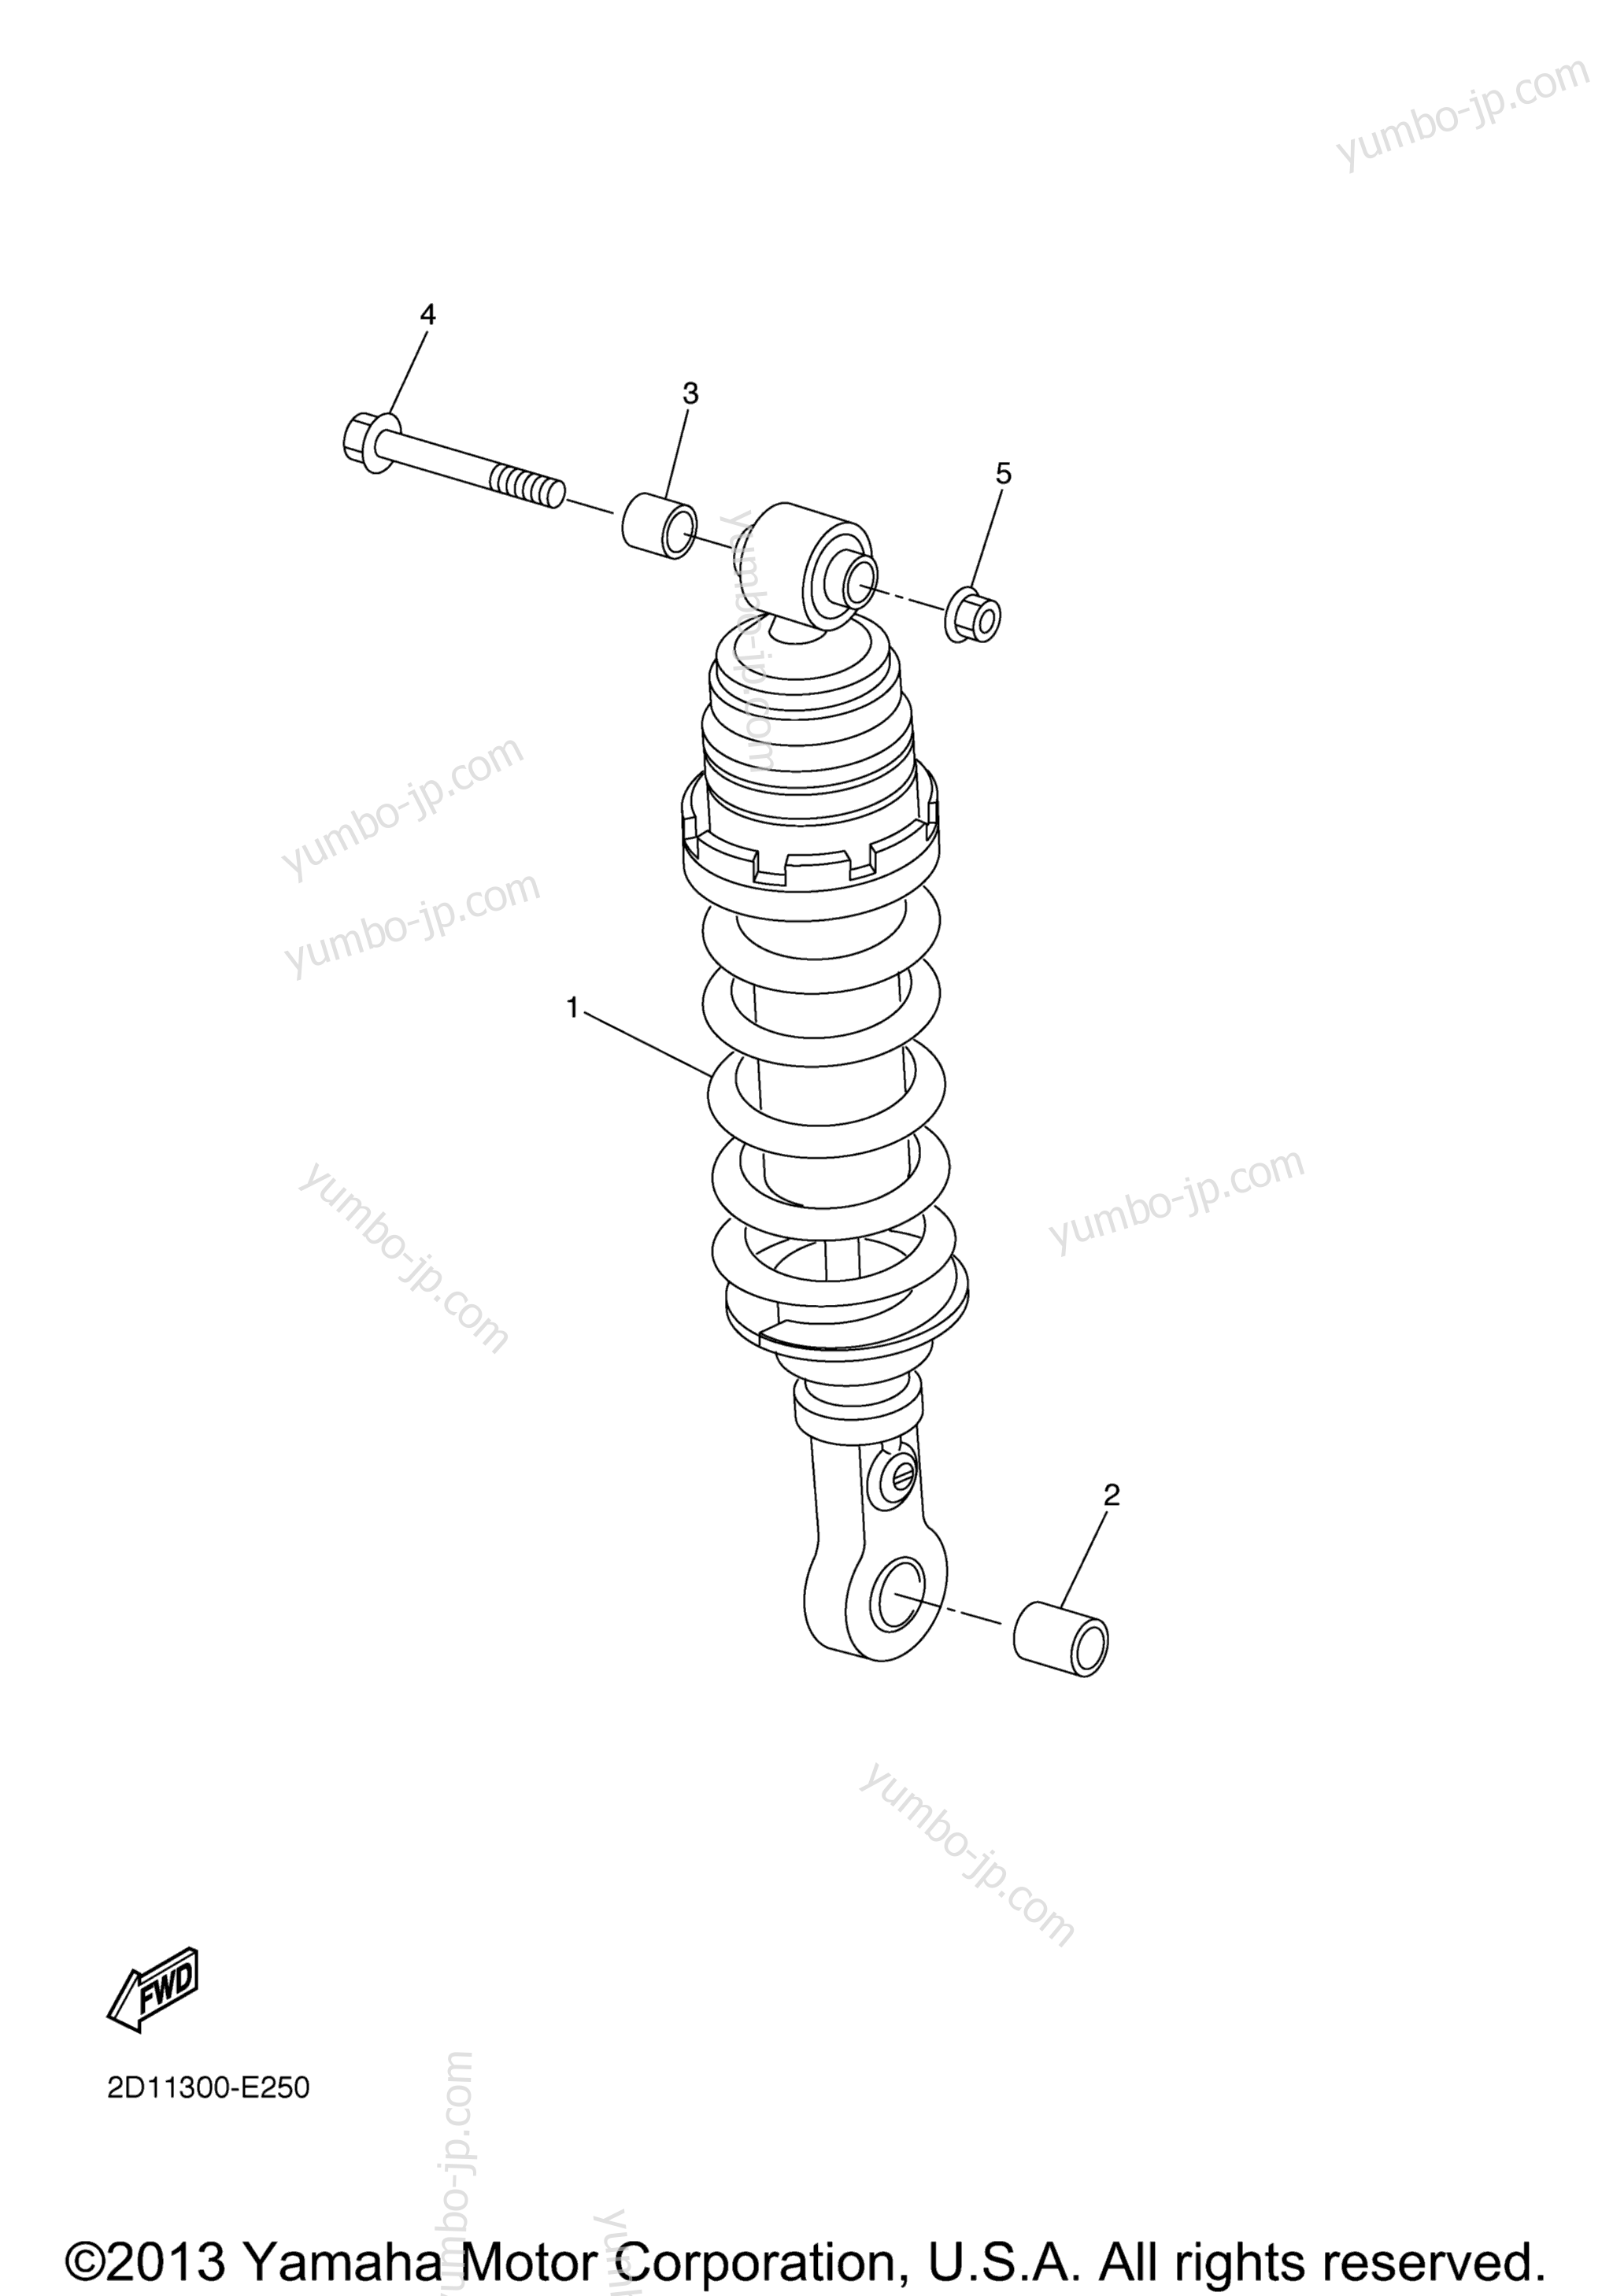 Rear Suspension for motorcycles YAMAHA FZ1 (FZS10AS) 2011 year